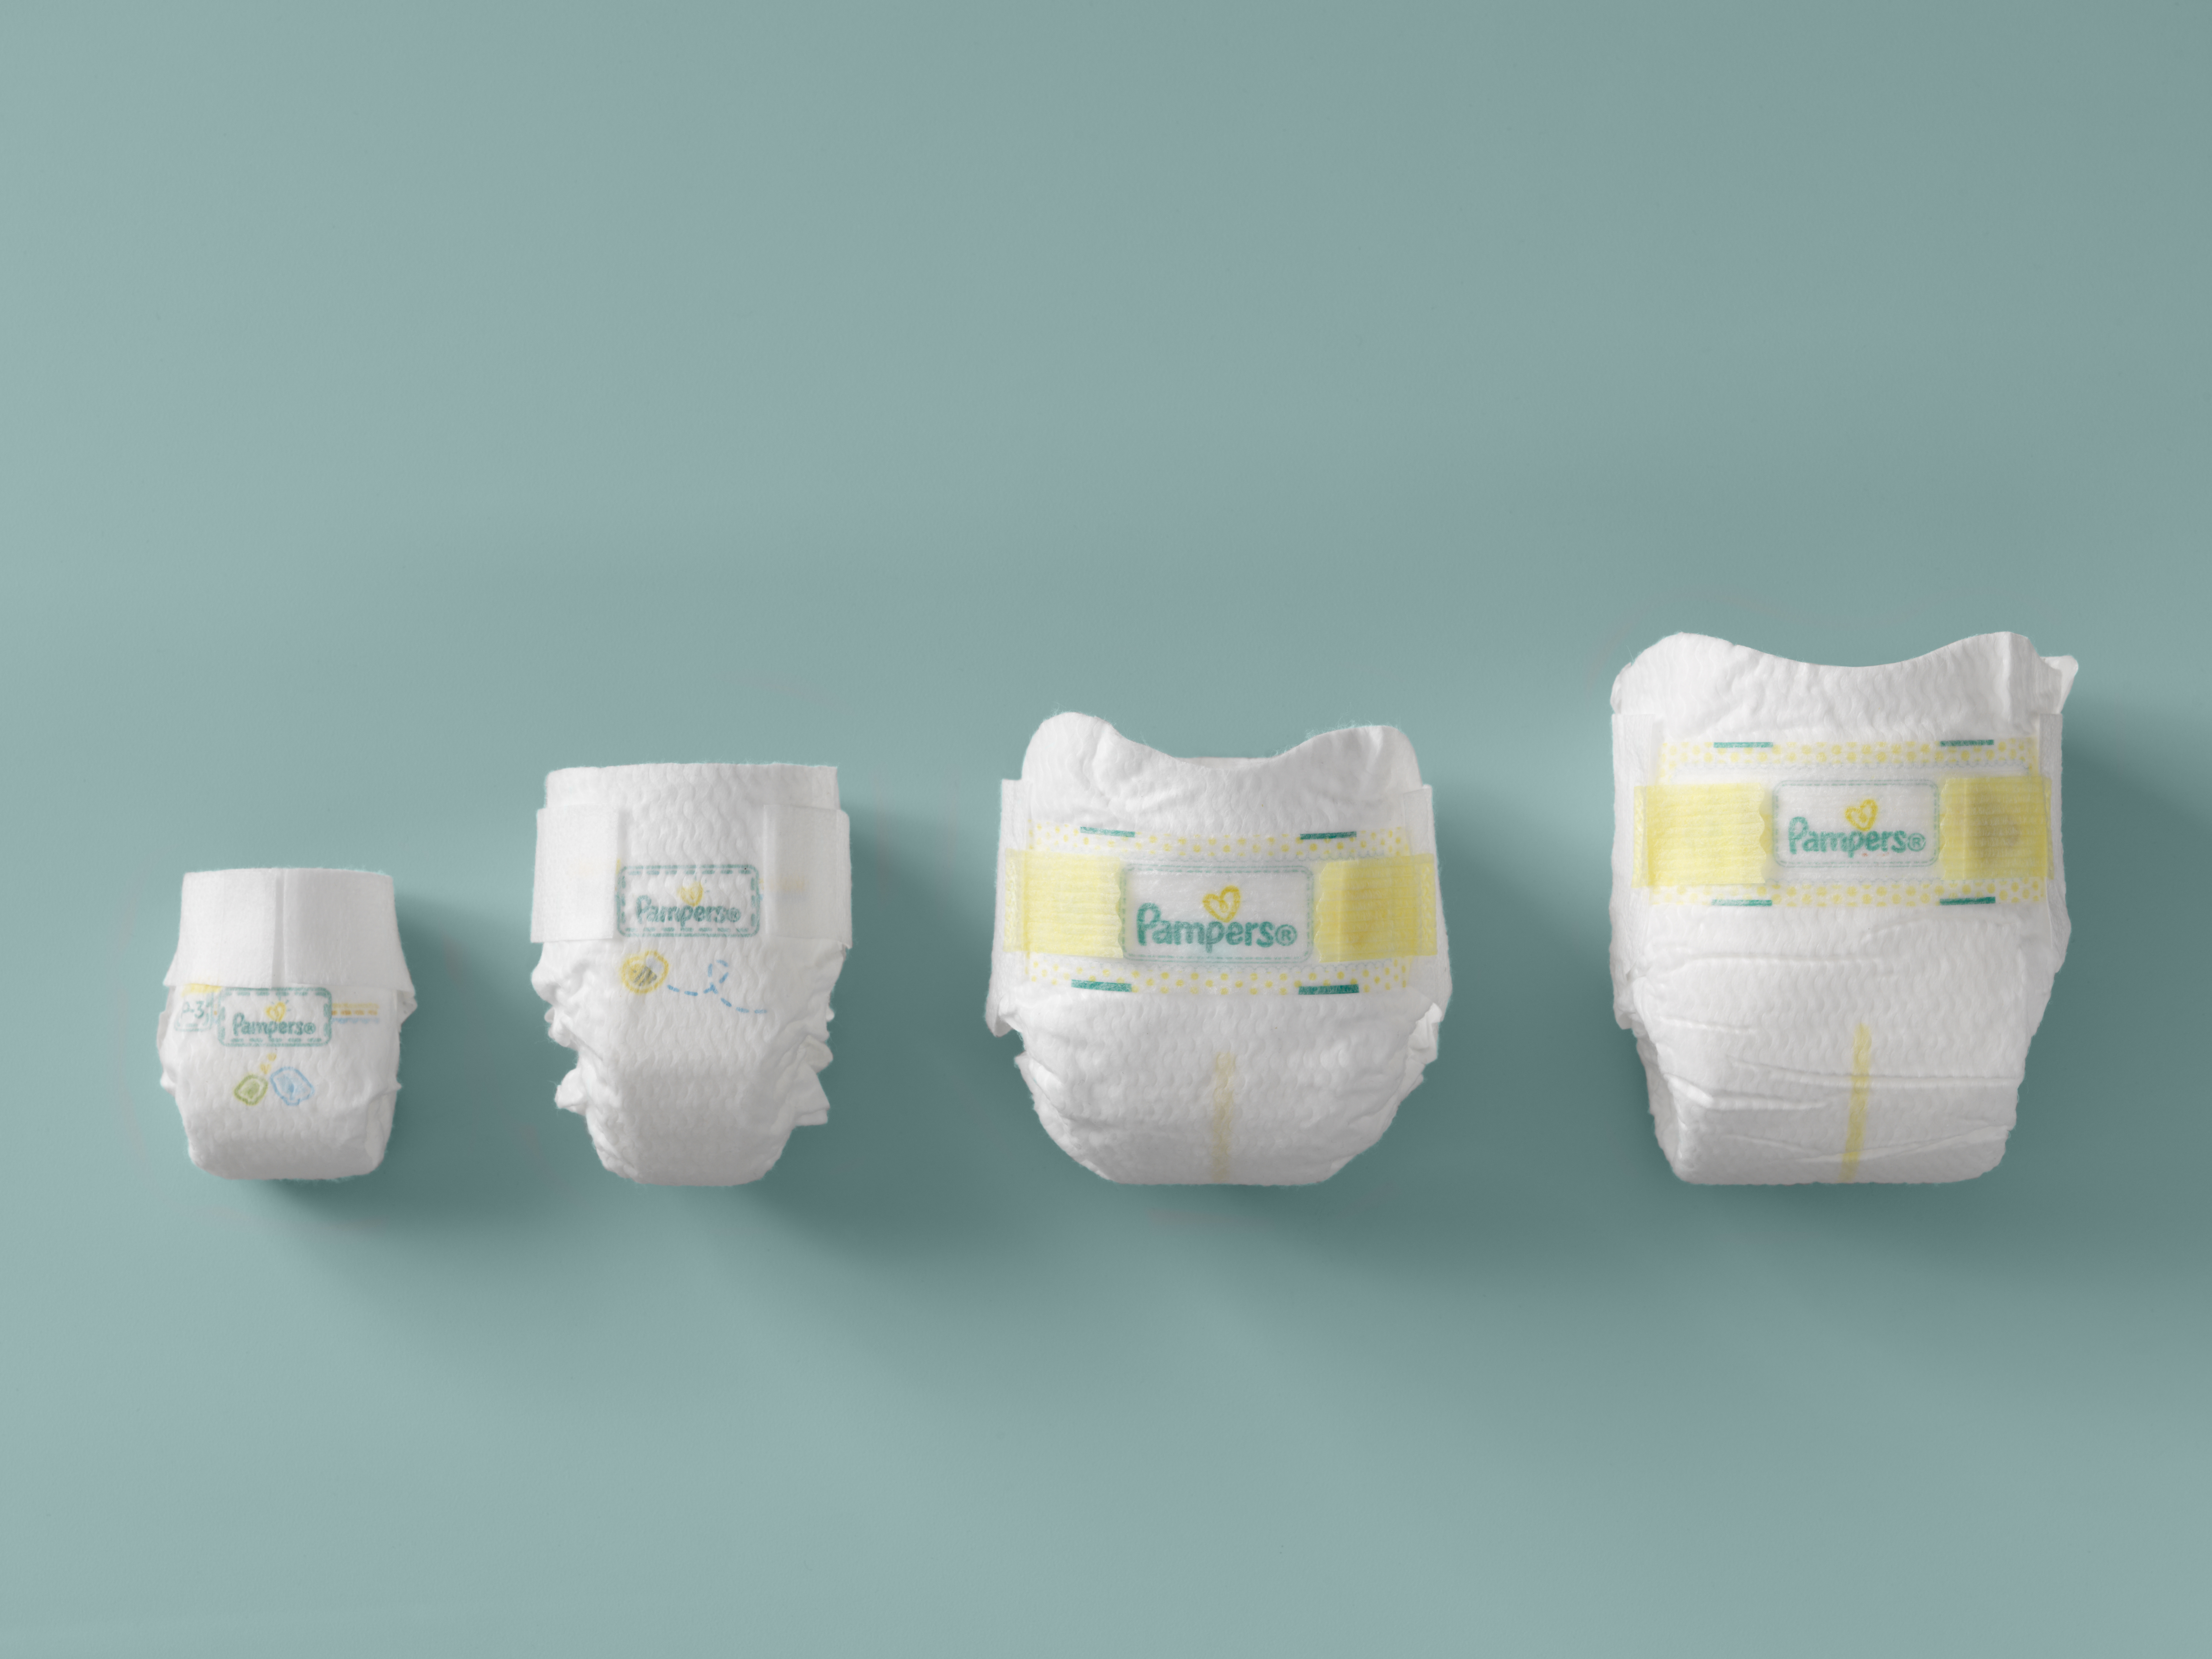 Pampers Delivers Its Smallest Diaper 